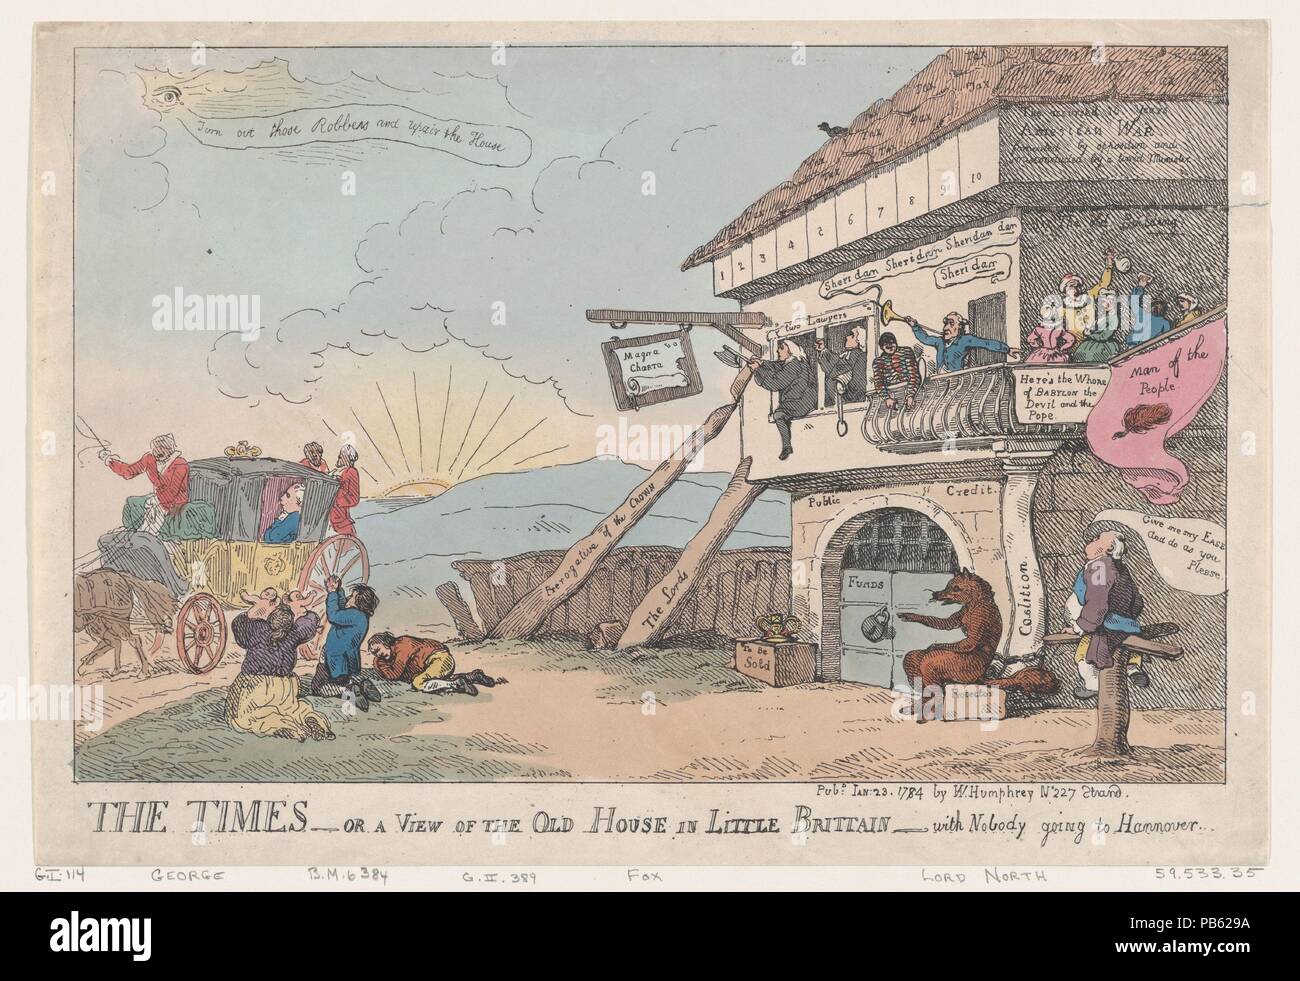 The Times - Or A View Of The Old House In Little Brittain - With Nobody Going To Hannover. Artist: Thomas Rowlandson (British, London 1757-1827 London). Dimensions: Sheet: 9 1/2 × 13 7/8 in. (24.2 × 35.2 cm). Published in: London. Publisher: William Humphrey (British, 1742?-before 1814). Subject: Charles James Fox (British, 1749-1806); Georgiana Cavendish, Duchess of Devonshire (British, Wimbledon, Surrey 1757-1806 Devonshire); Frederick North, 2nd Earl of Guilford (British, 1732-1792); George III, King of Great Britain and Ireland (British, London 1738-1820 Windsor); The Right Honorable Edmun Stock Photo